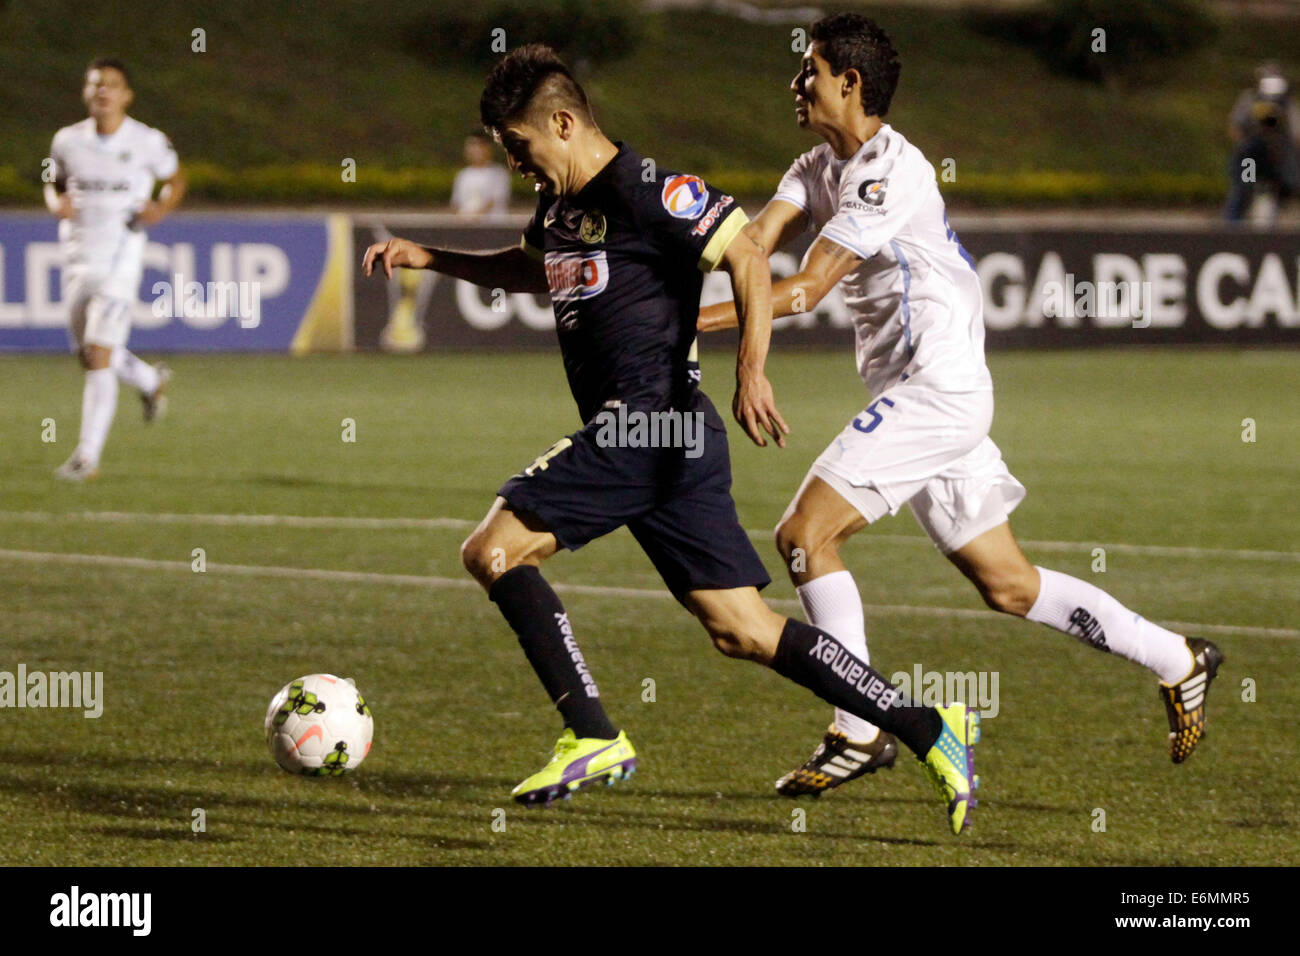 Guatemala City, Guatemala. 26th Aug, 2014. Jorge Aparicio (R) of Comunicaciones of Guatemala vies for the ball with Oribe Peralta of America of Mexico during the match of the CONCACAF Champions League, in Guatemala City, capital of Guatemala, on Aug. 26, 2014. © Luis Echeverria/Xinhua/Alamy Live News Stock Photo